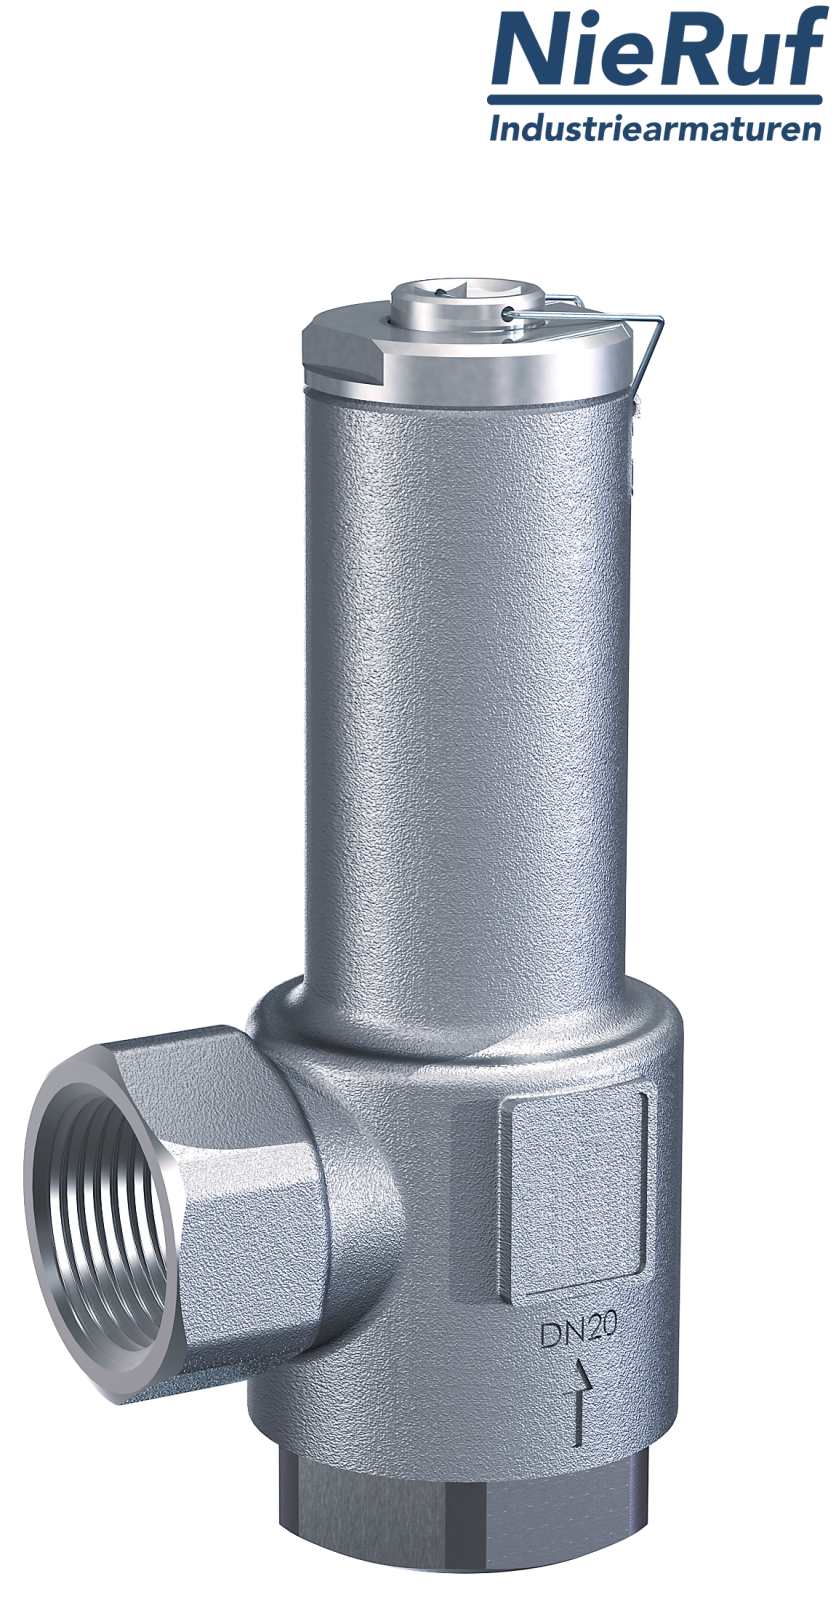 angle-type overflow valve 1" inch fm UV04 stainless steel AISI 316L 0,5 - 2,5 bar